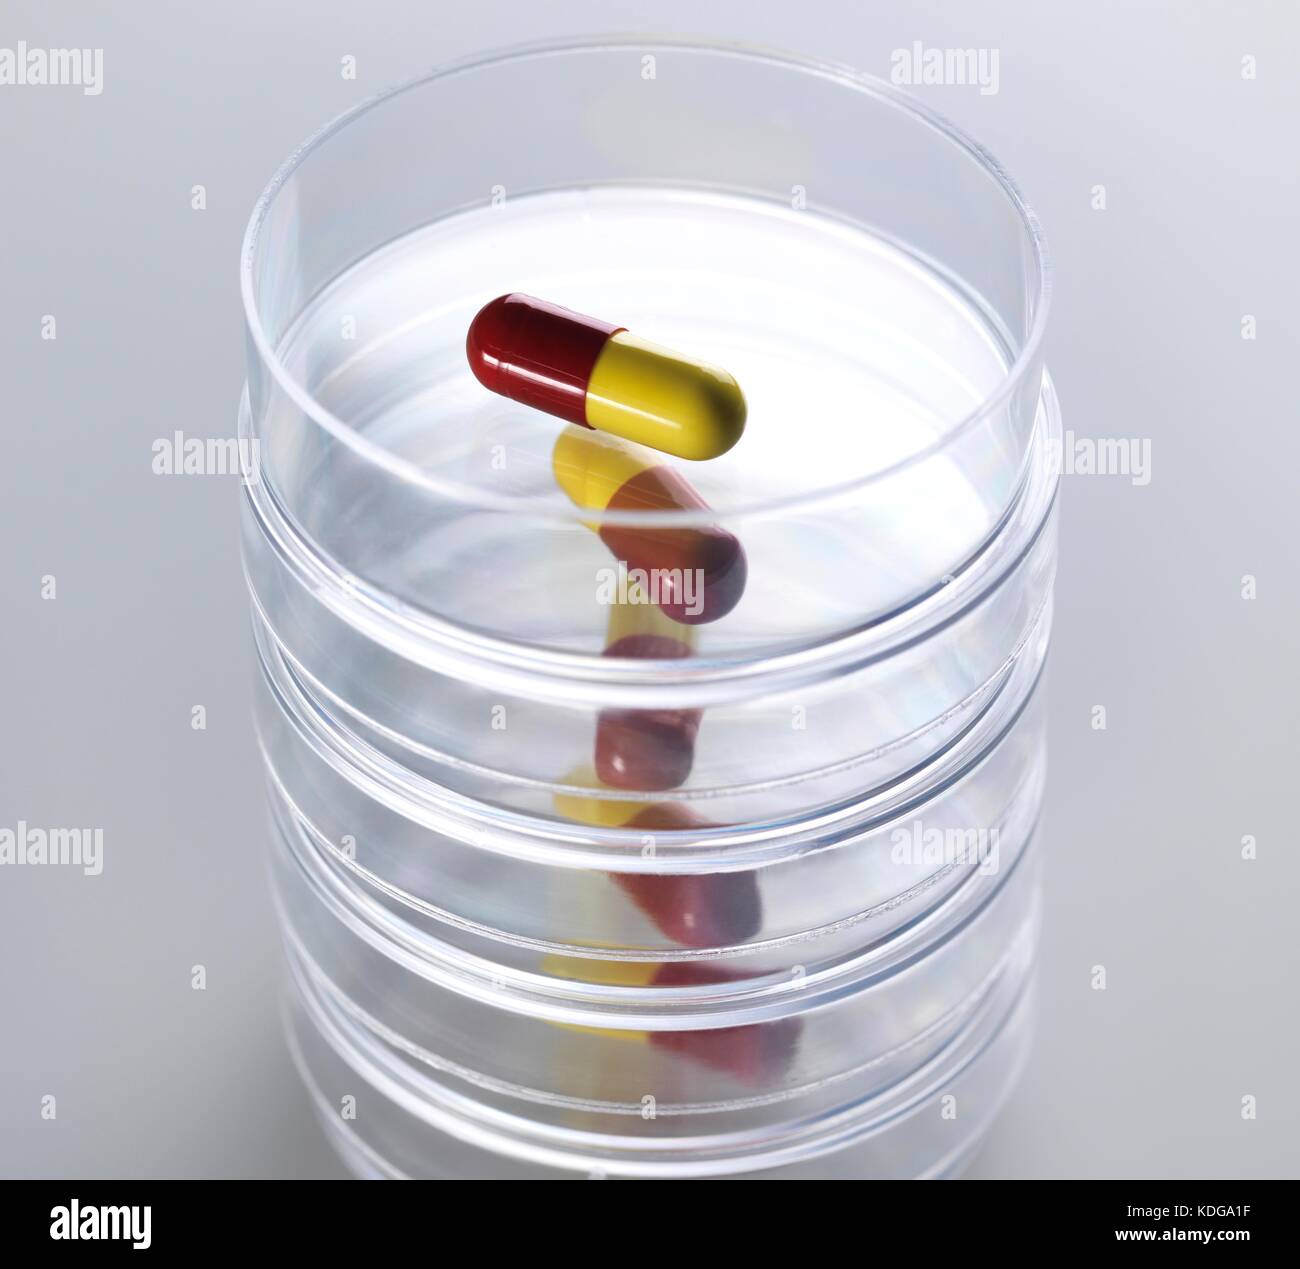 Pills in Petri dishes illustrating drug research and clinical testing. Stock Photo